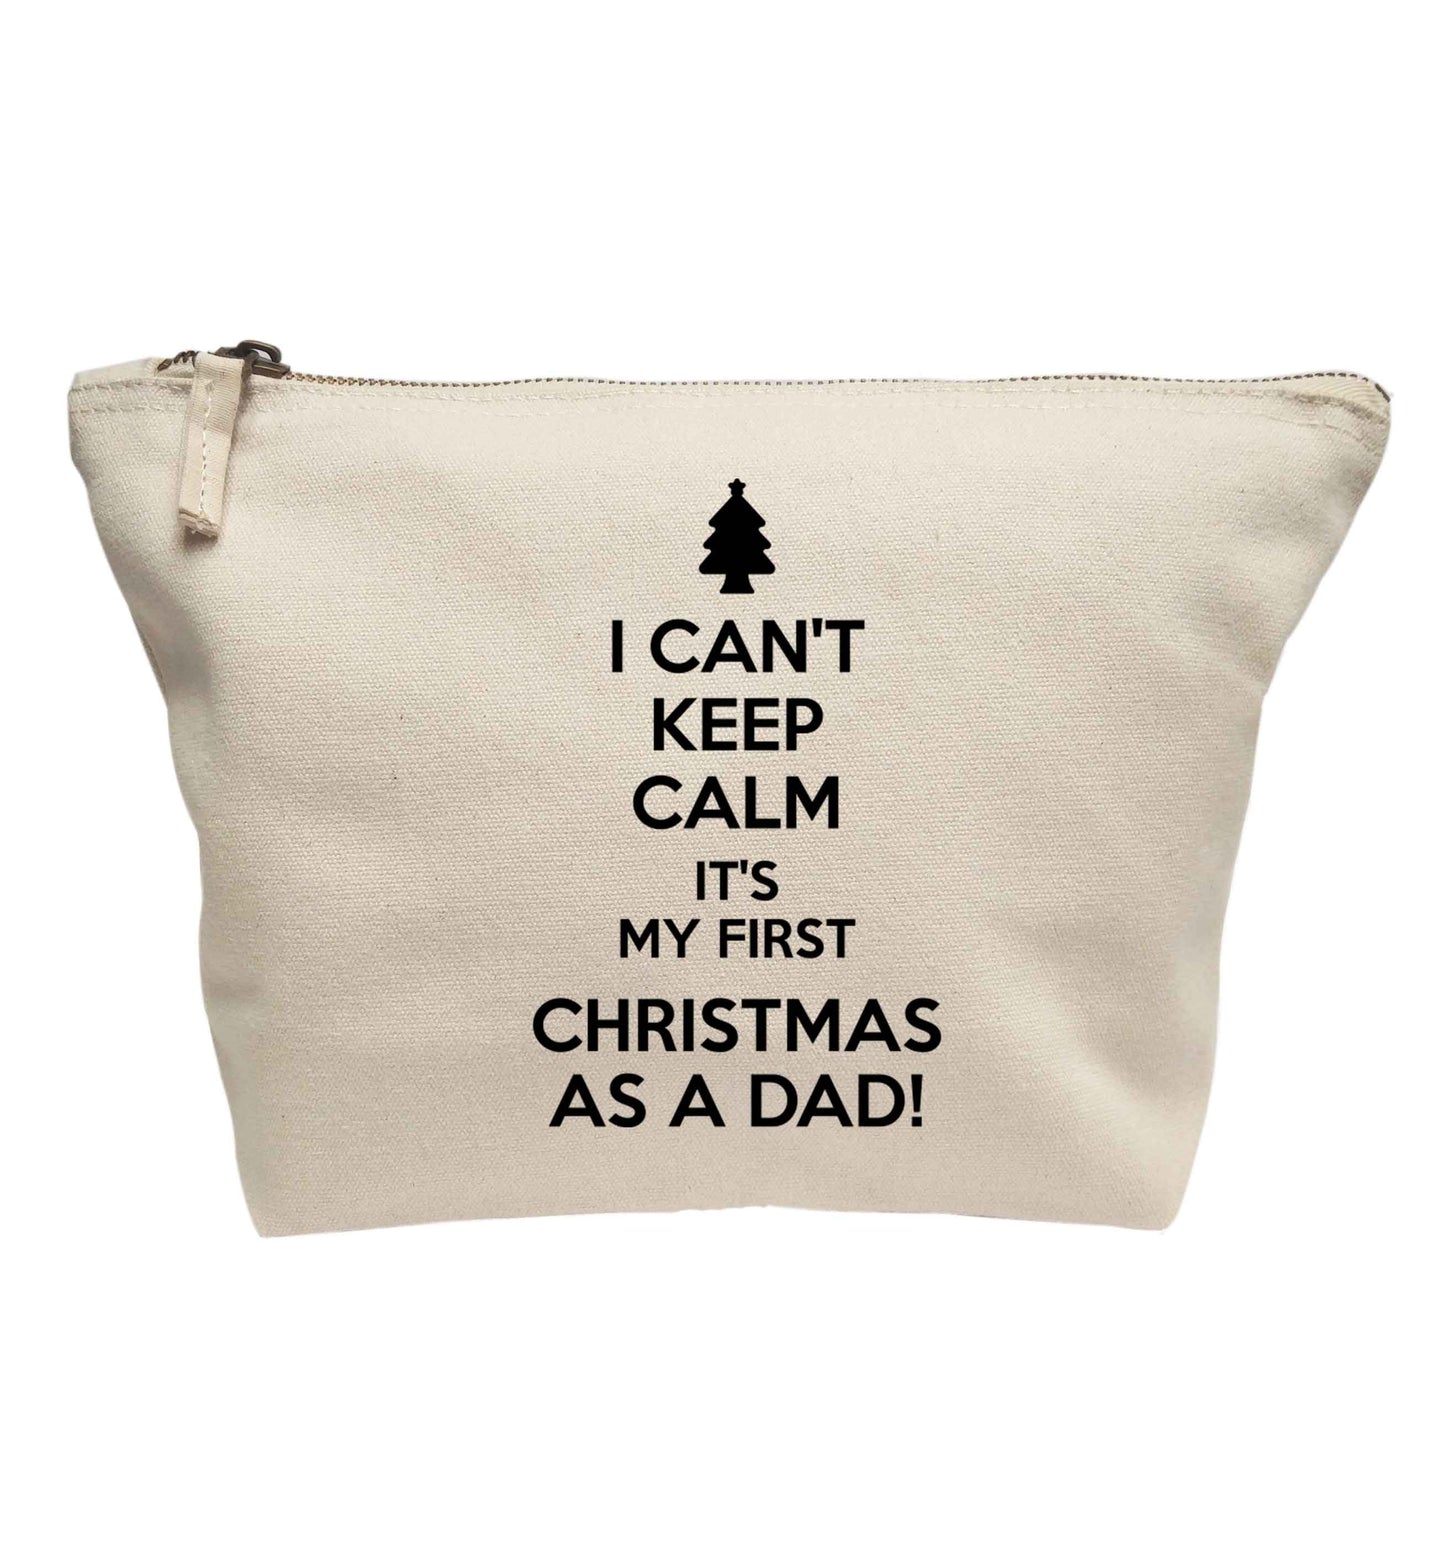 I can't keep calm it's my first Christmas as a dad | makeup / wash bag